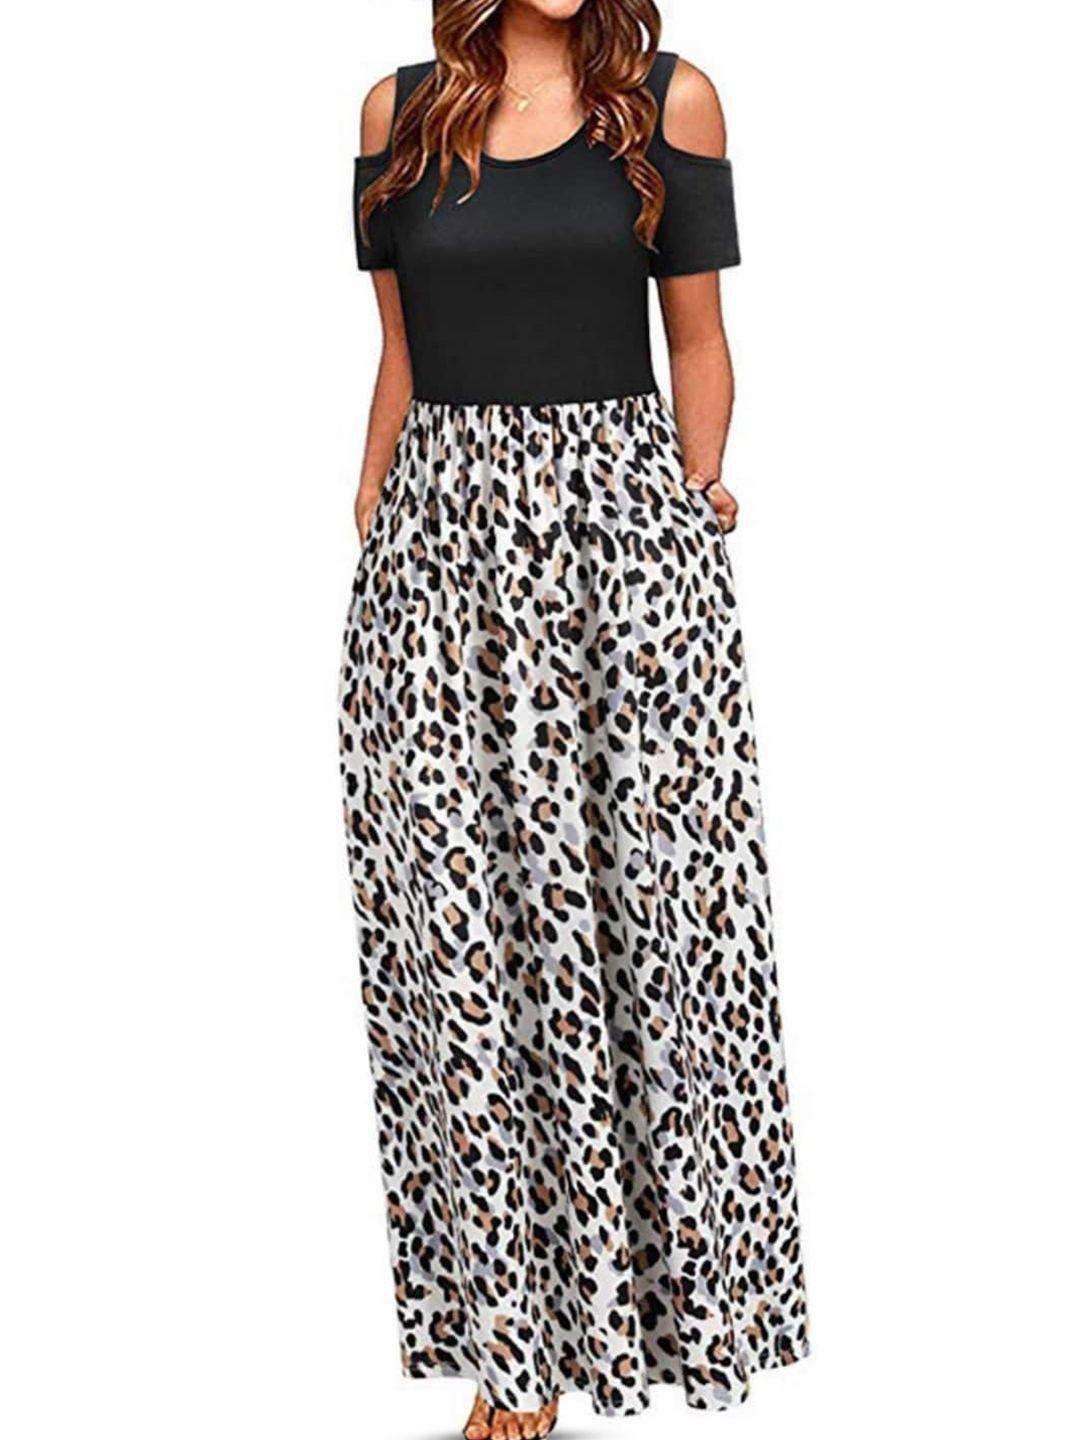 stylecast x kpop animal printed round neck cold-shoulder gathered party maxi dress